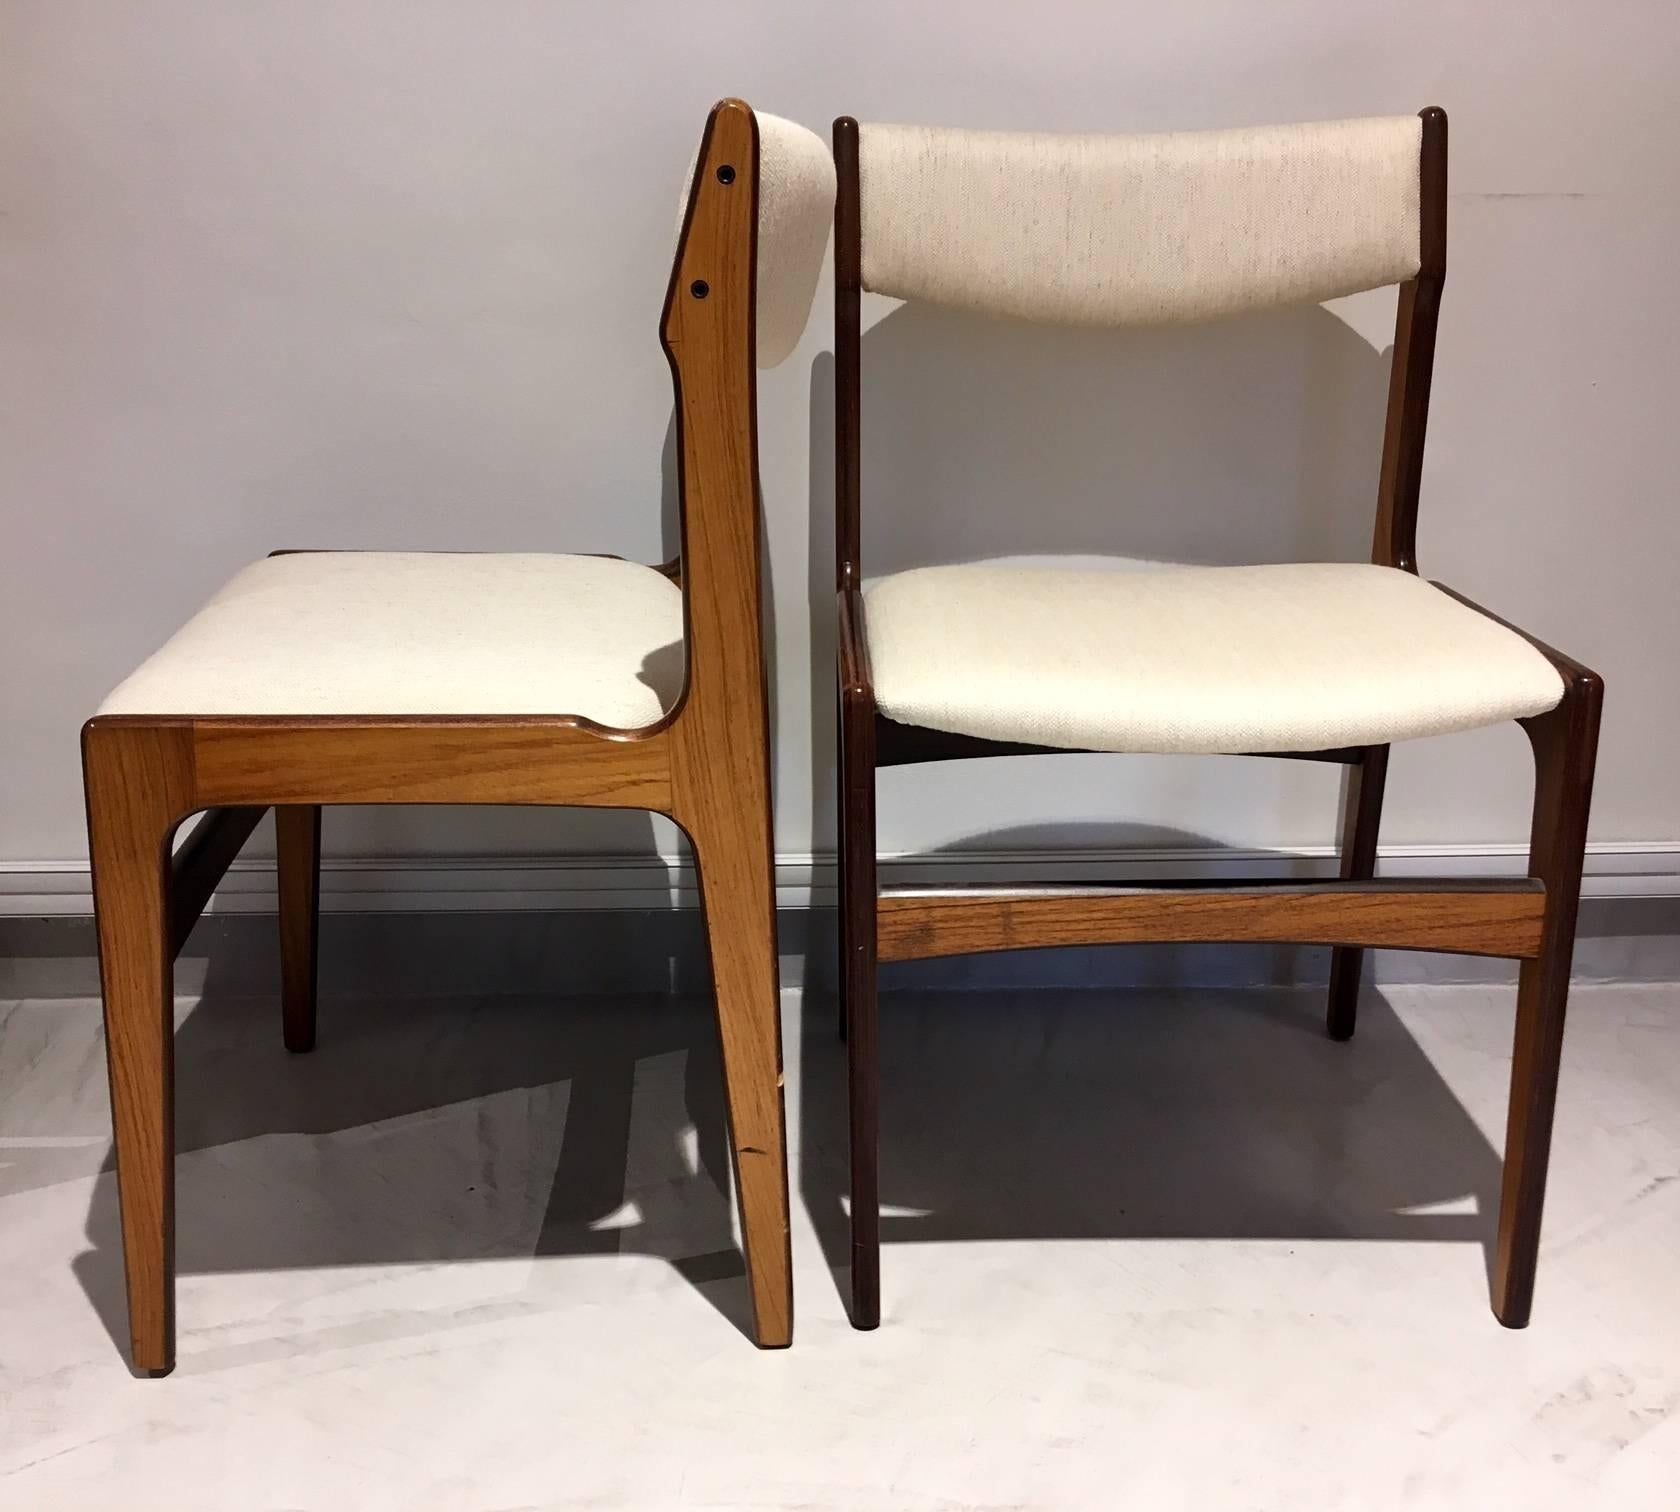 20th Century Set of Six Danish Modern Wooden Dining Chairs with White Covers